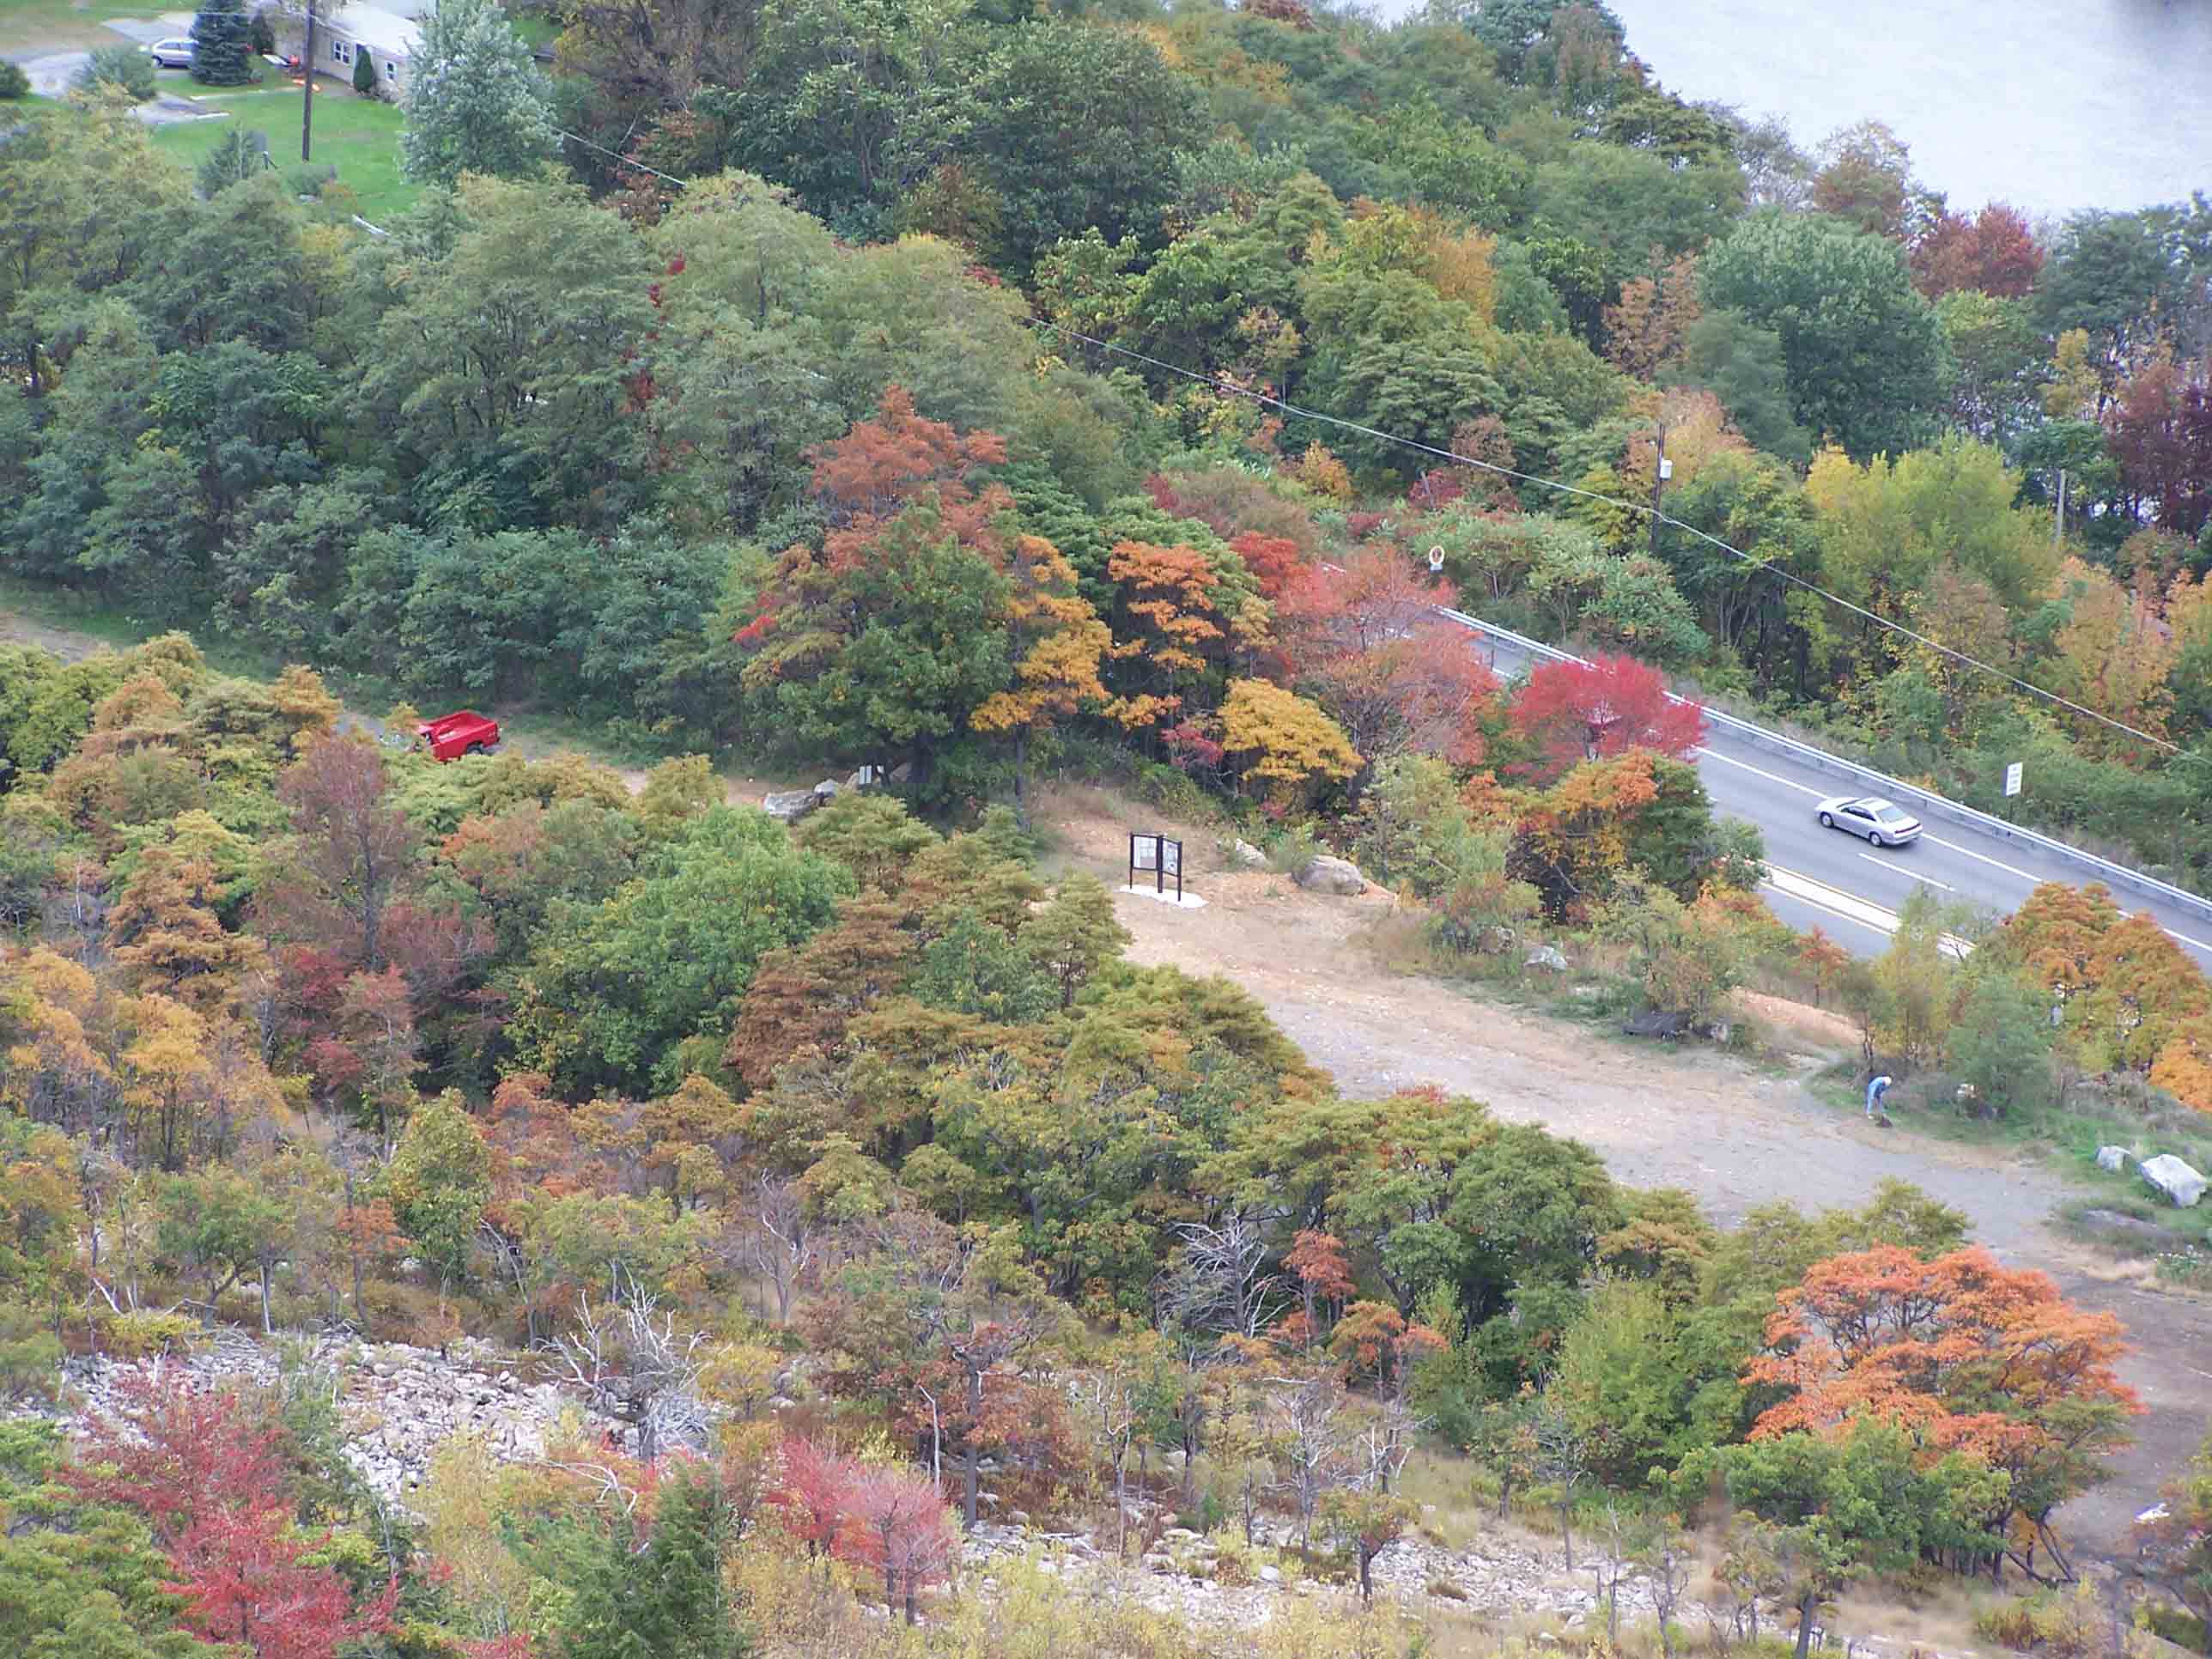 View of parking lot at mm 20.3 in Lehigh Gap. This was once a railroad bed. Courtesy at@rohland.org